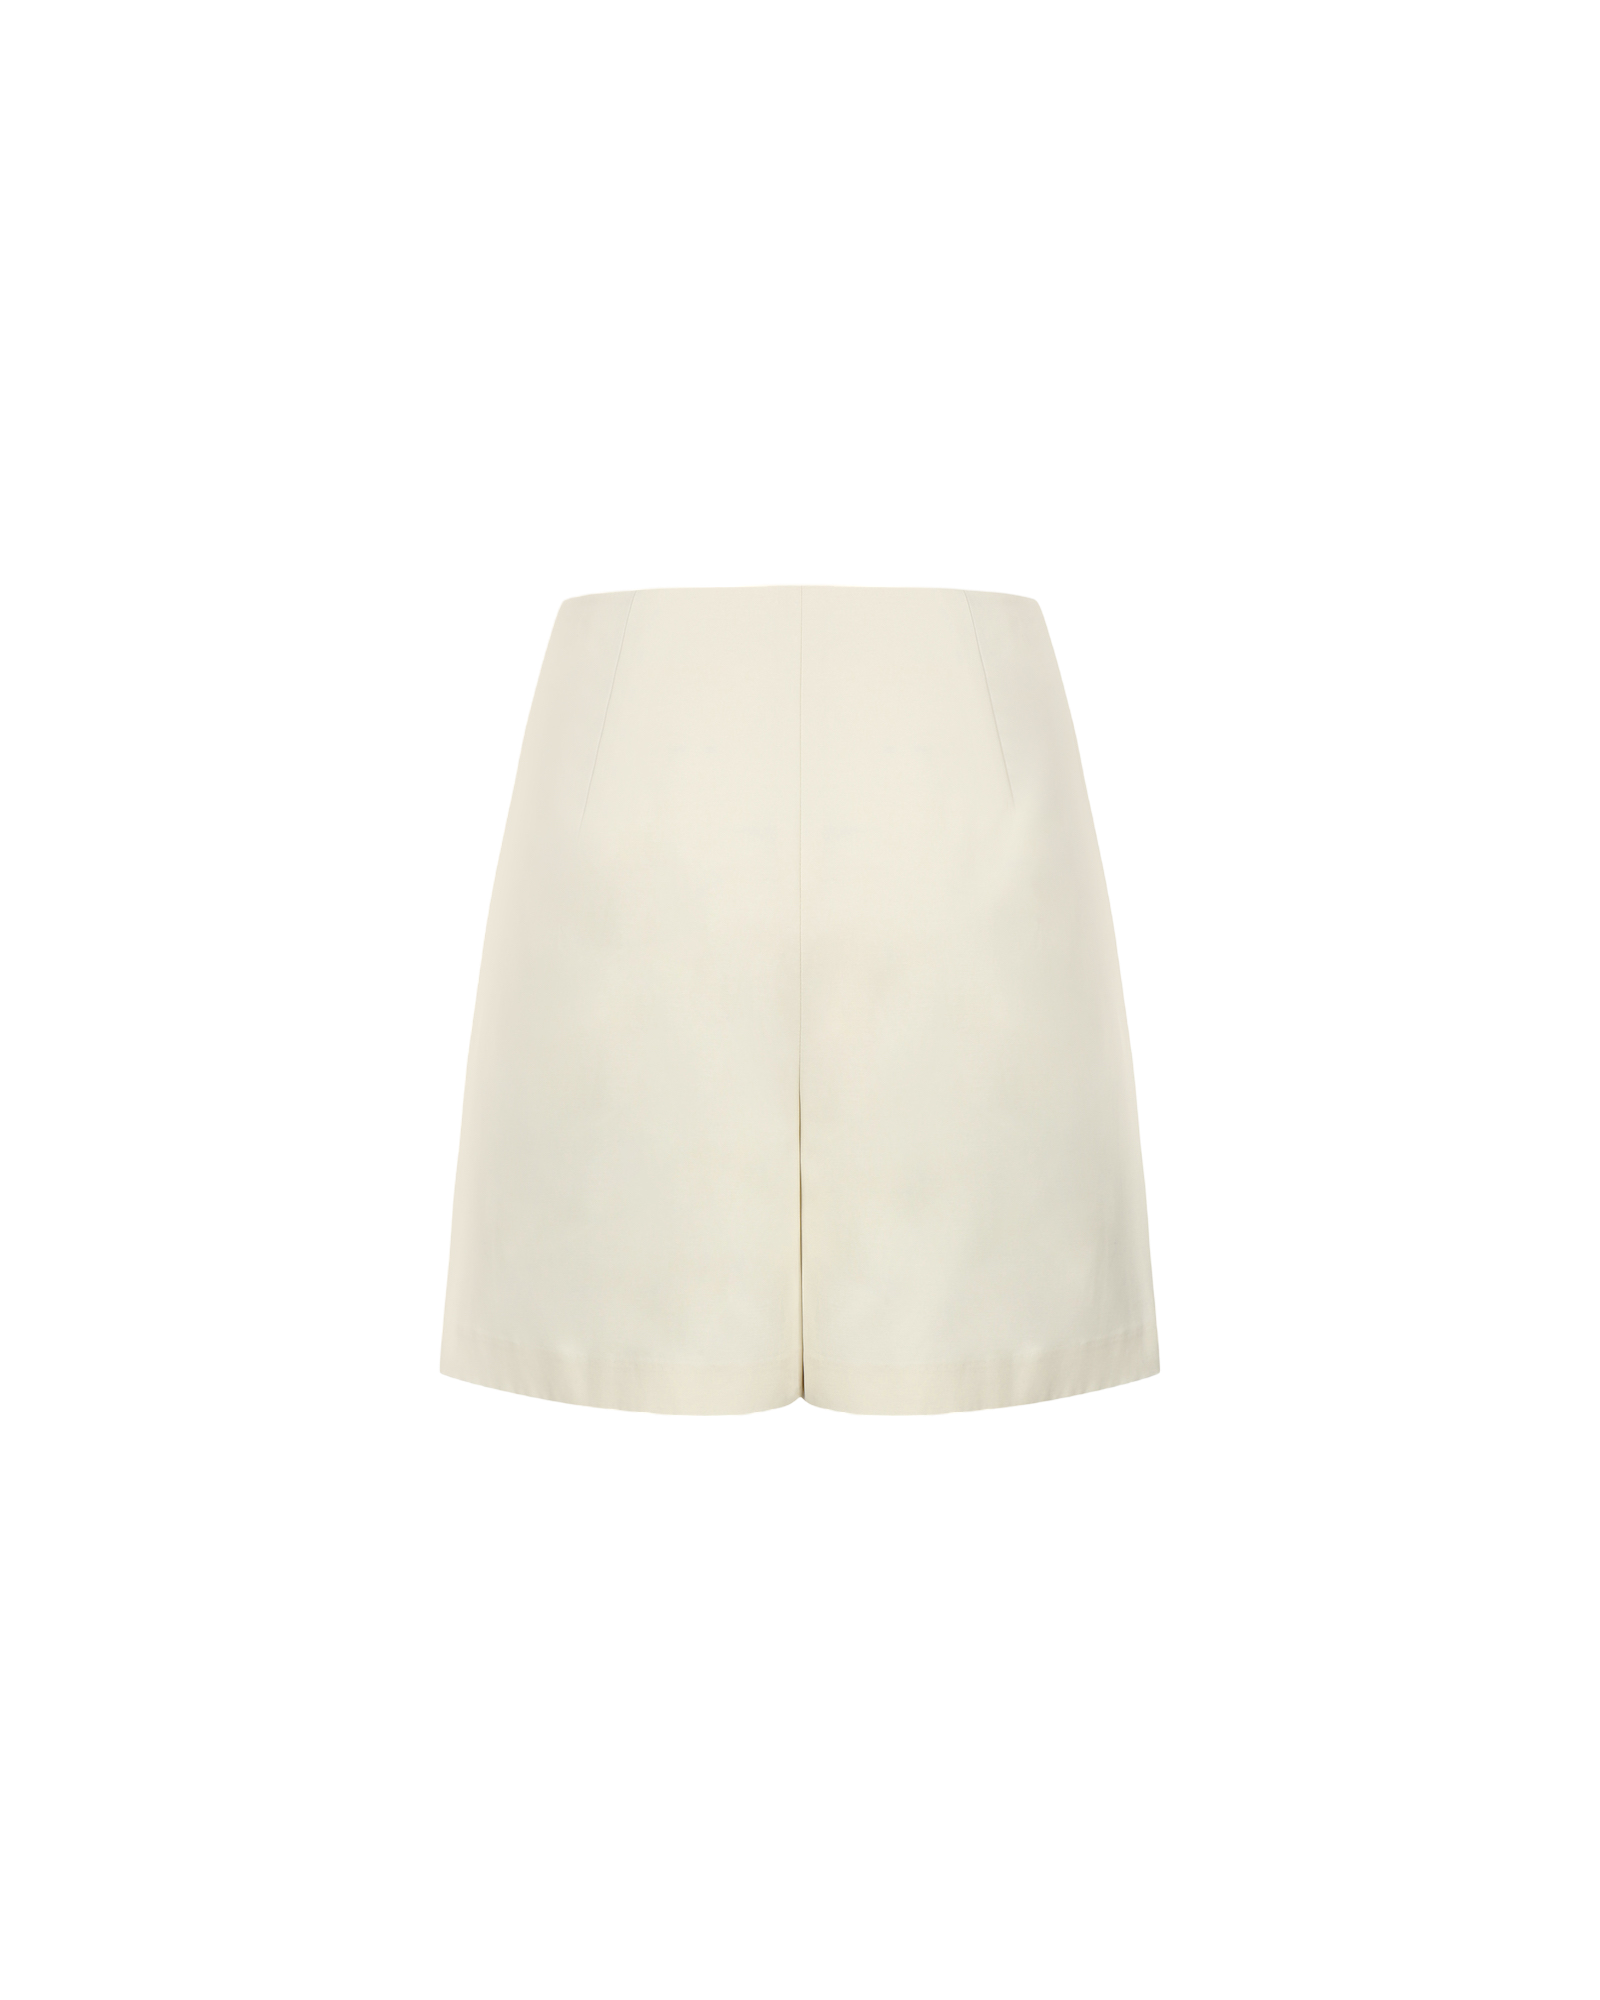 Button Wrap Skirt Pants In Ivory